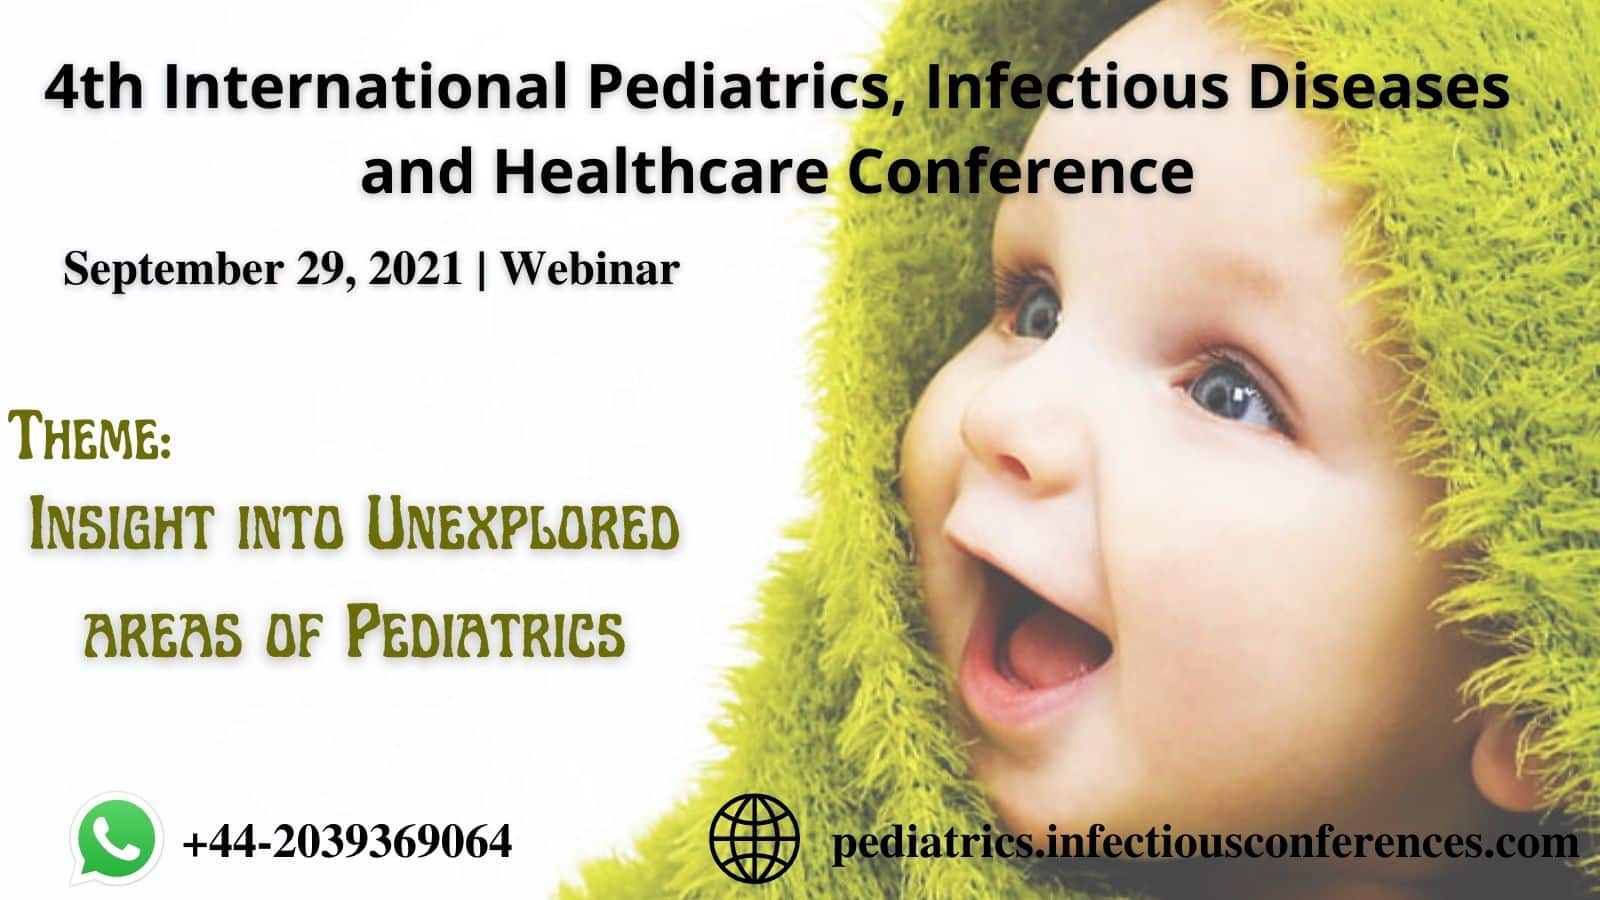 4th International Pediatrics, Infectious Diseases and Healthcare